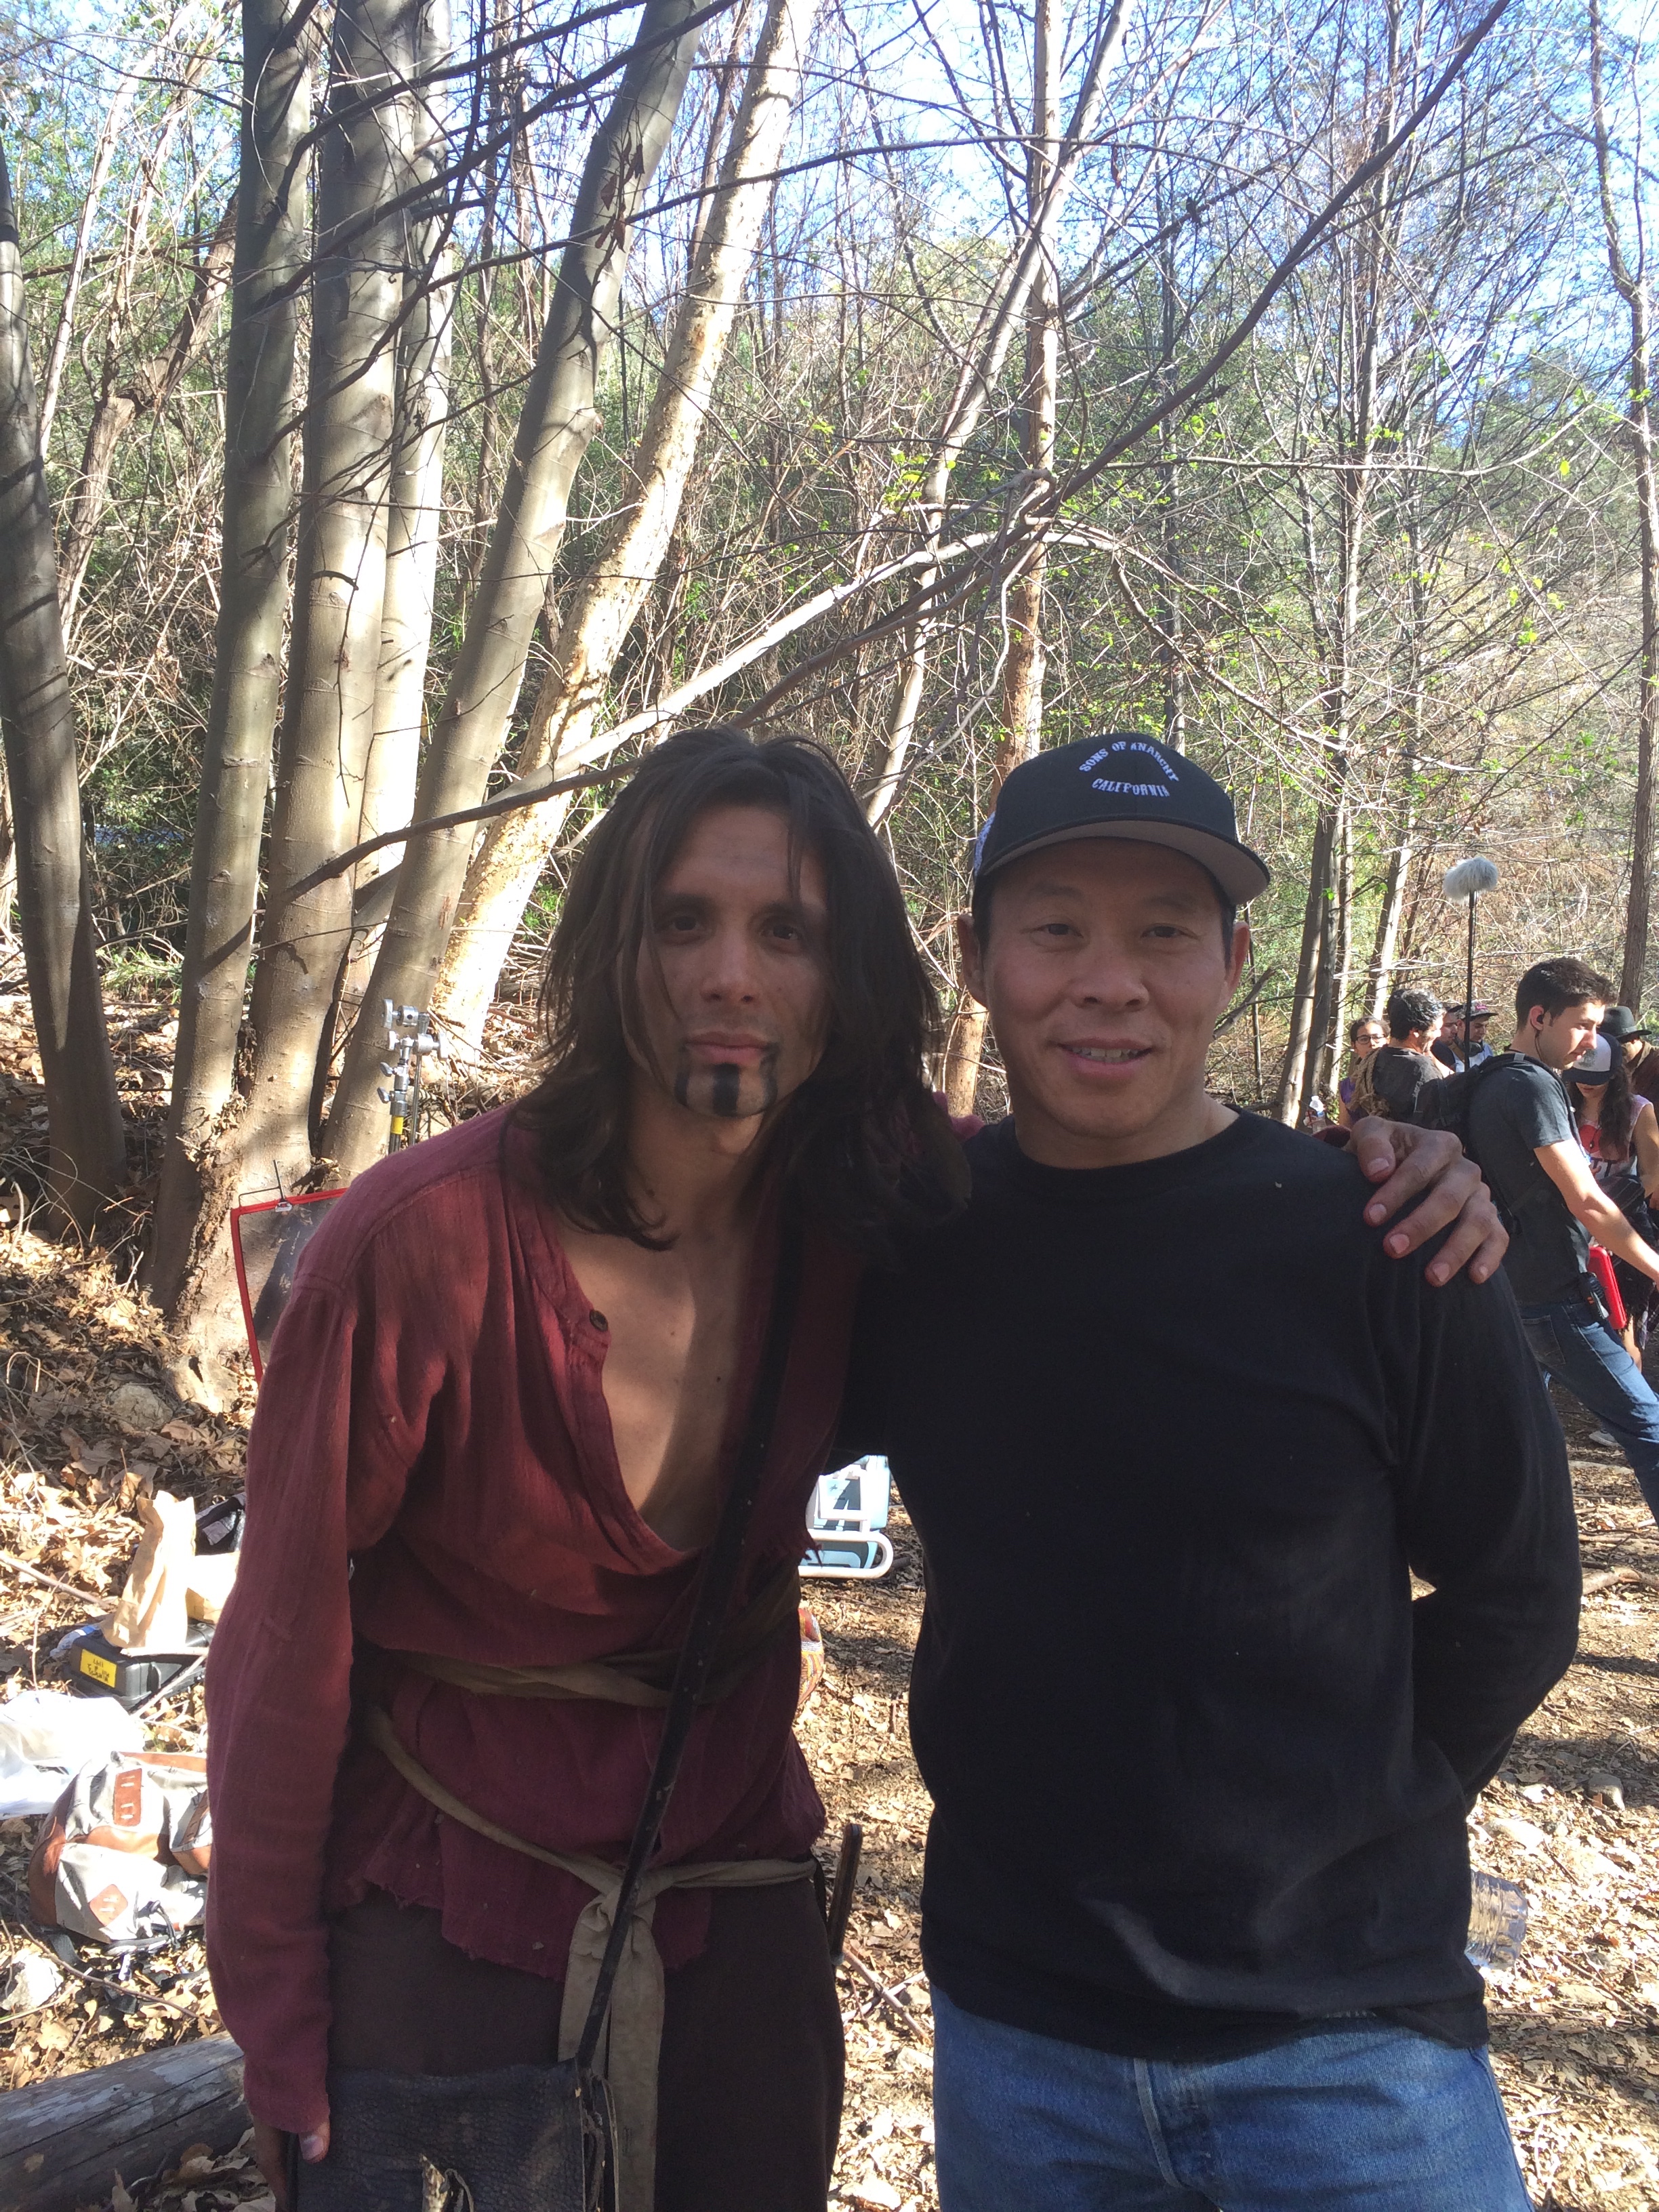 LUISEÑO FILM (ASUZA PACIFIC UNIVERSITY) CALIFORNIA 2015 WITH STUNT COORDINATOR WILLIAM LEONG (PIRATES OF THE CARIBEAN, AT WORLDS END, THE LAST SAMURAI, COLLATERAL, HEROES, PRISON BREAK, THE MATRIX RELOADED, BATMAN FOREVER)